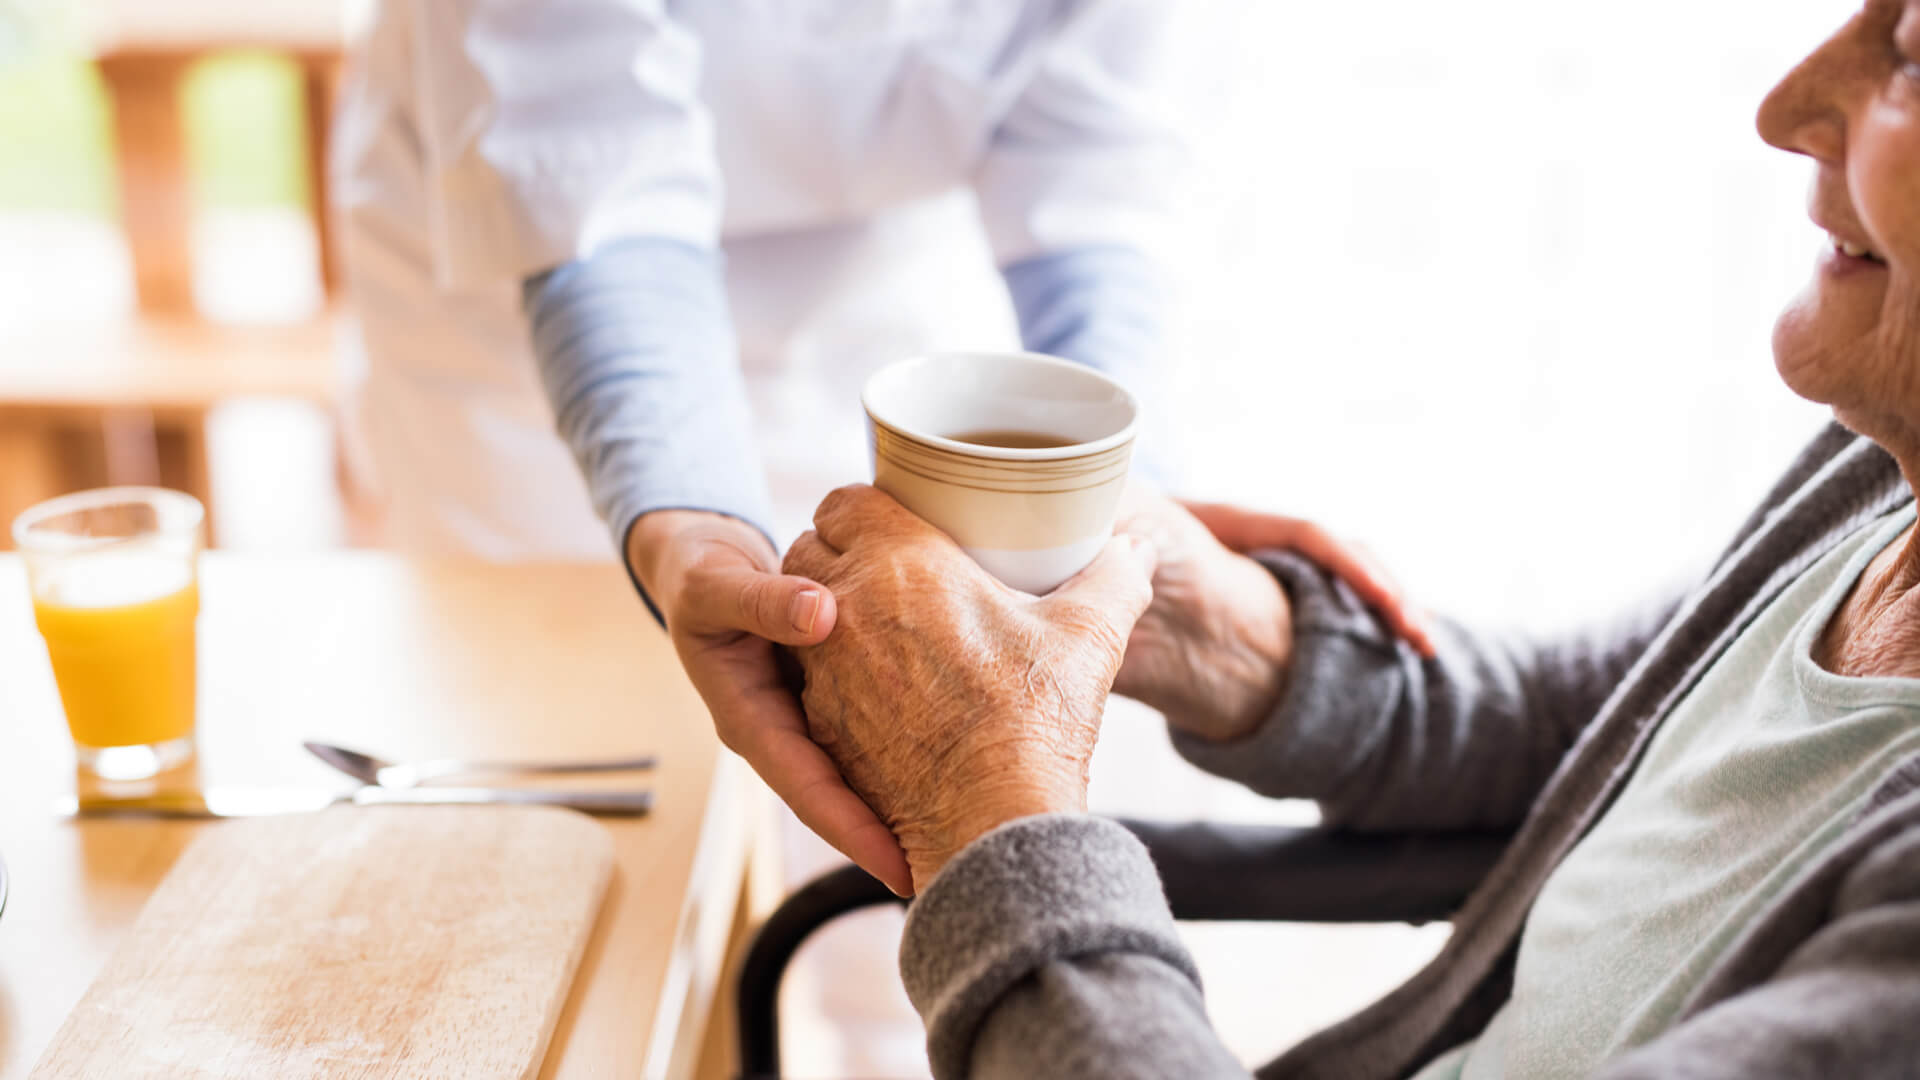 Finding A Home Care Agency in Nottingham For Your Loved One